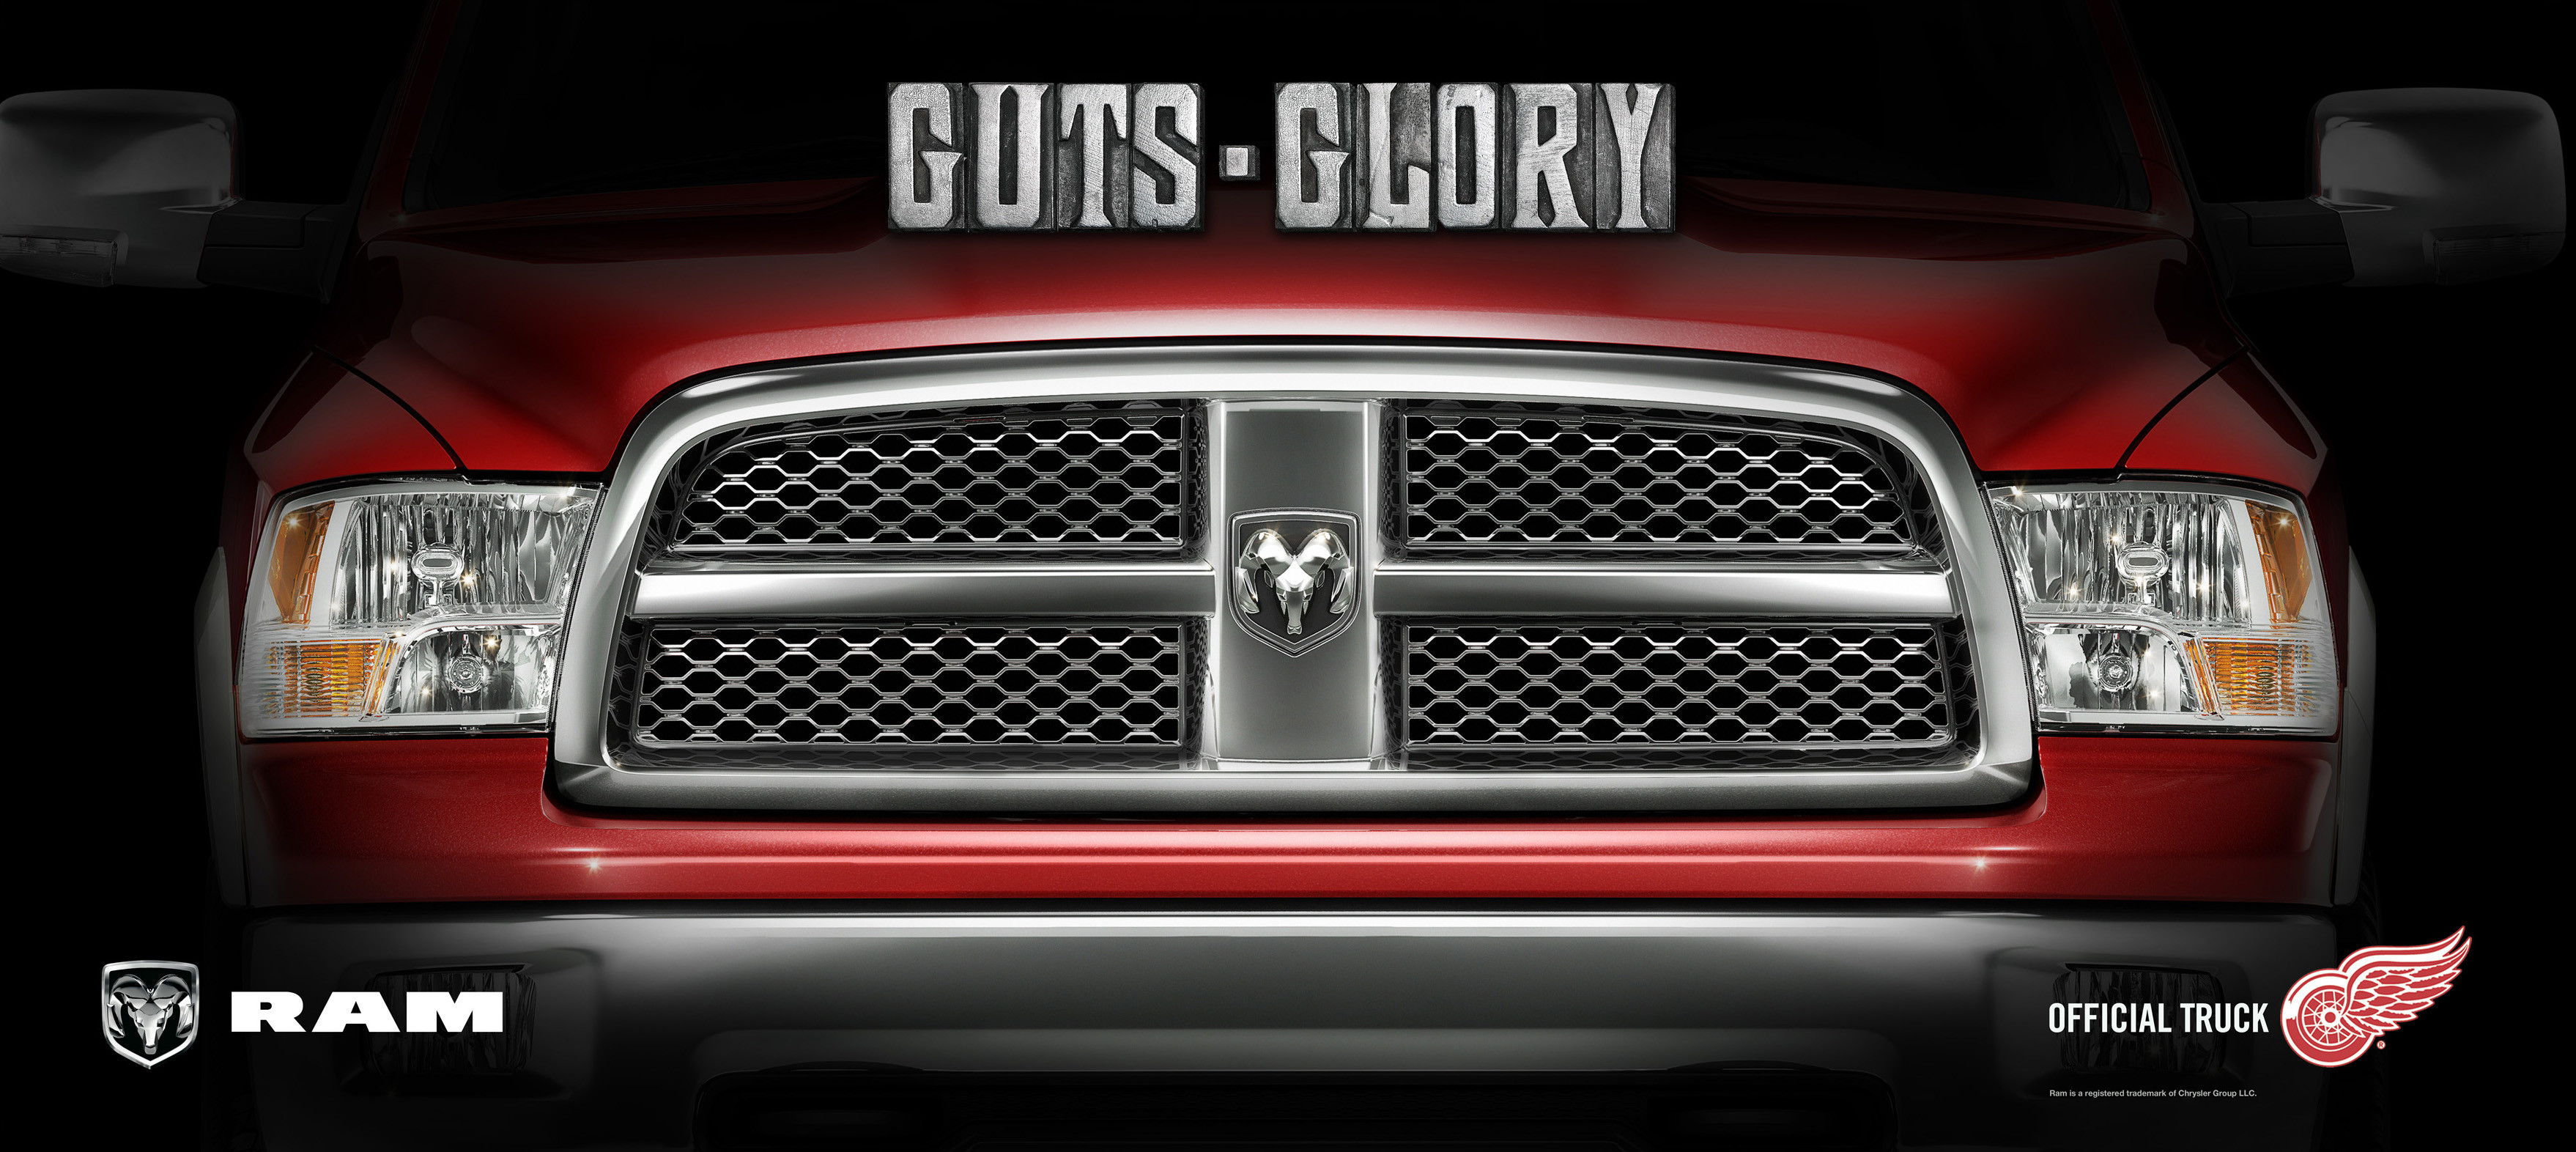 3516x1572 Guts Glory Ram Logo. Red Wings Edition Dodge Ram. Related Images Â· Guts  Glory